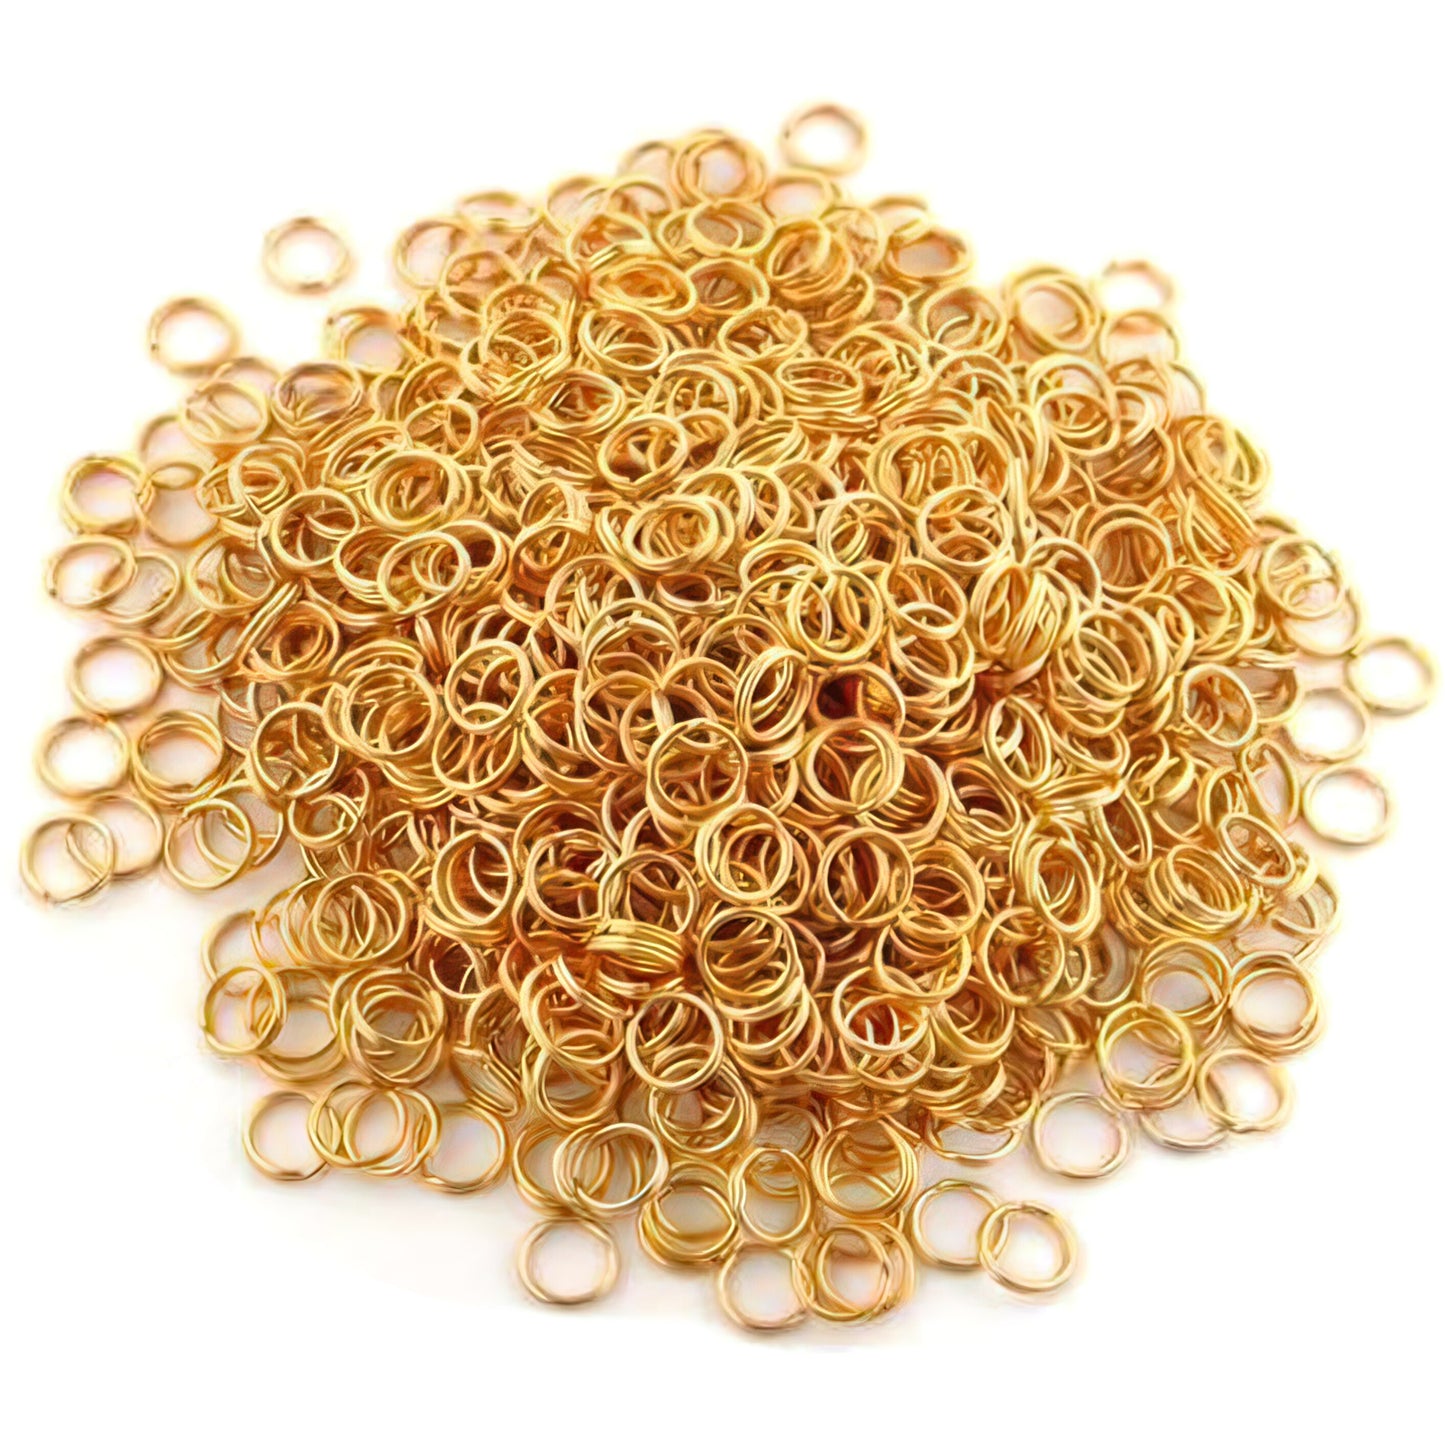 1000 Gold Plated Split Ring Jewelry Chain Parts 9mm